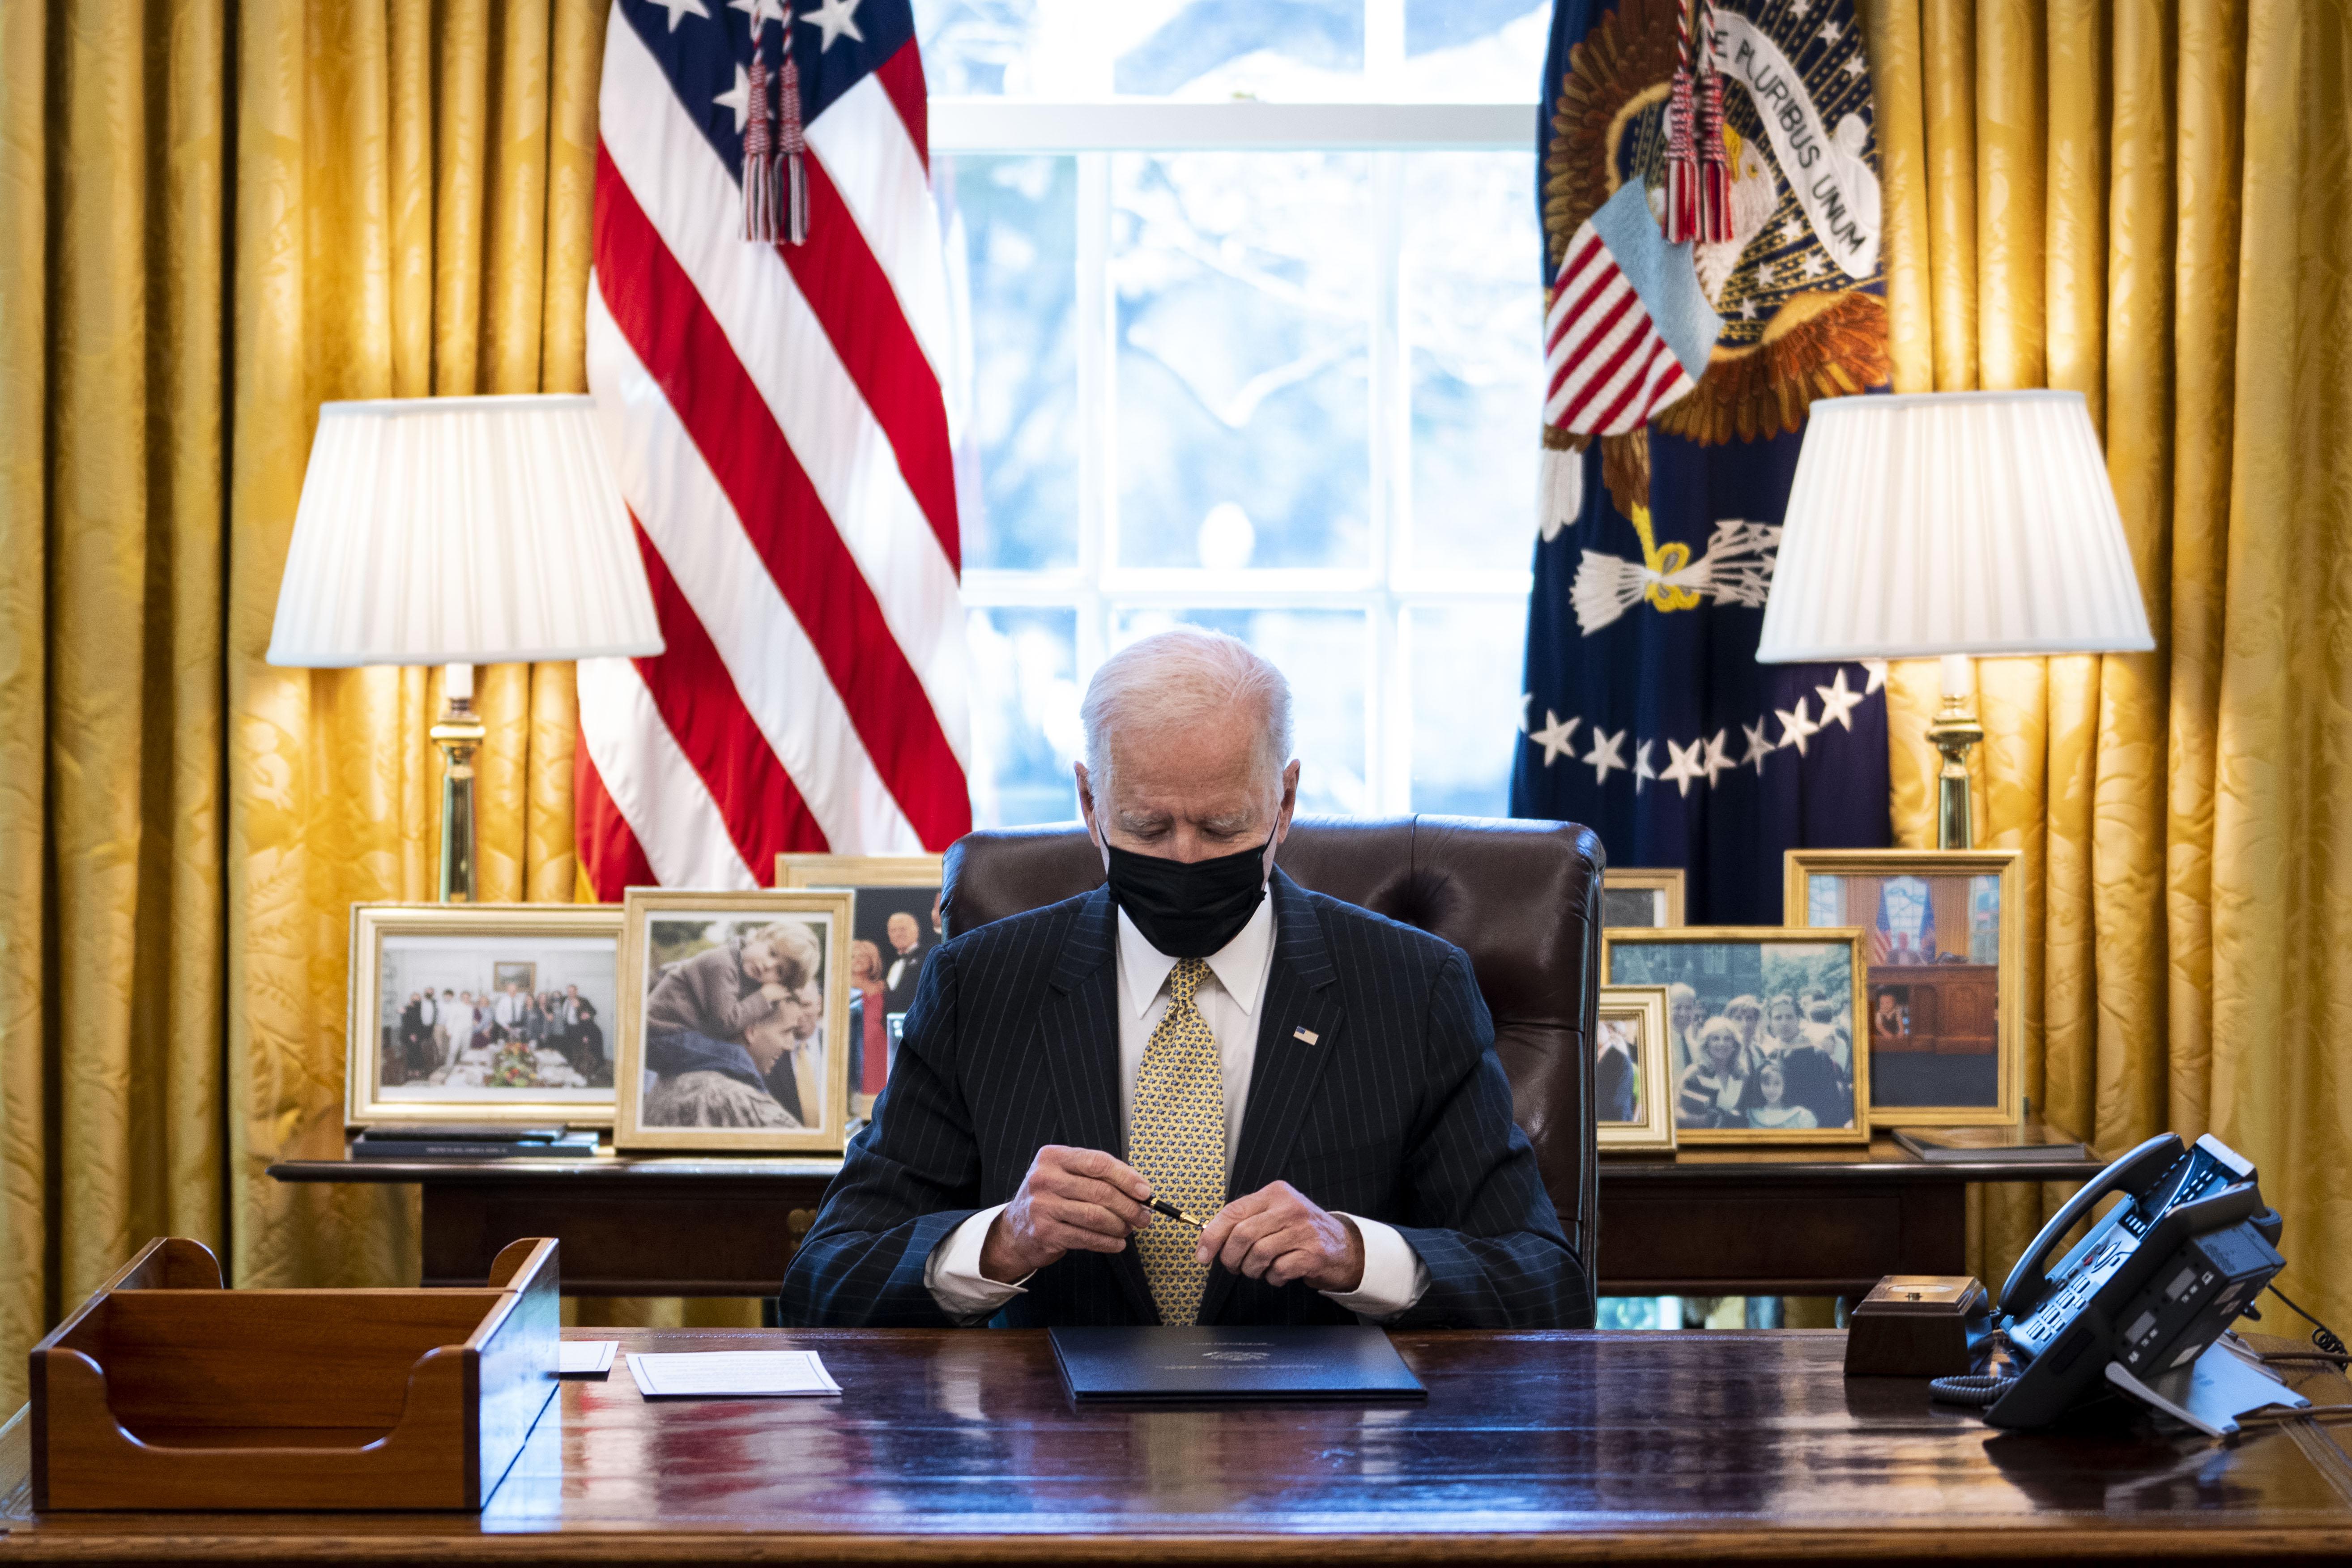 Biden caps a pen while seated at the Resolute Desk wearing a black mask